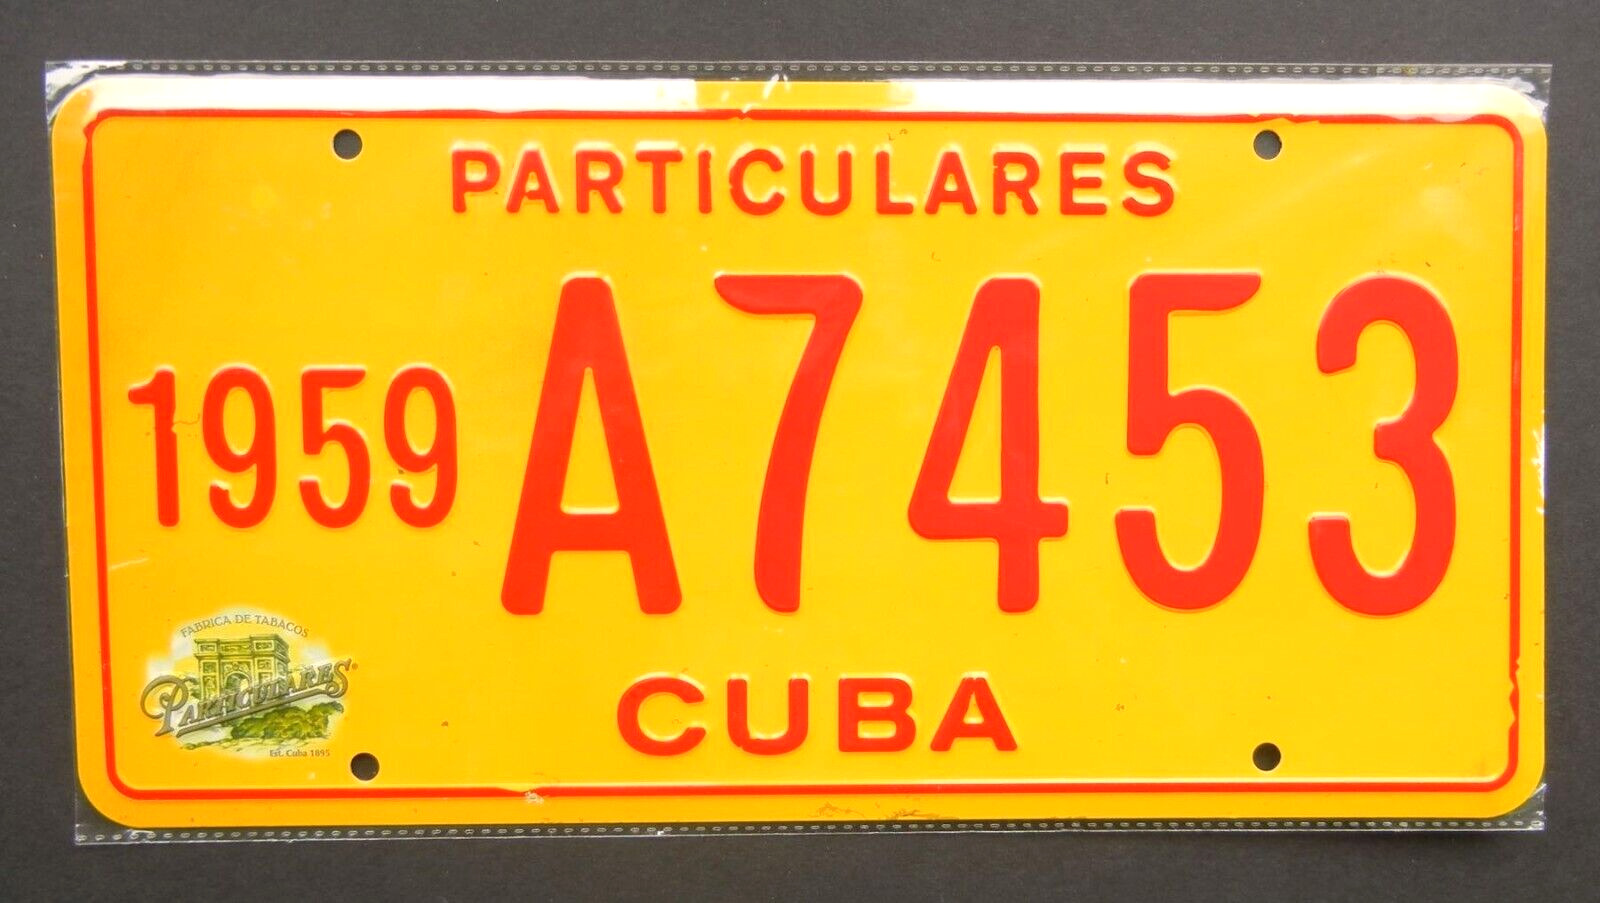 NEW Particulares Cigars 1959 CUBA Advertising LICENSE PLATE Metal Sign # A7453